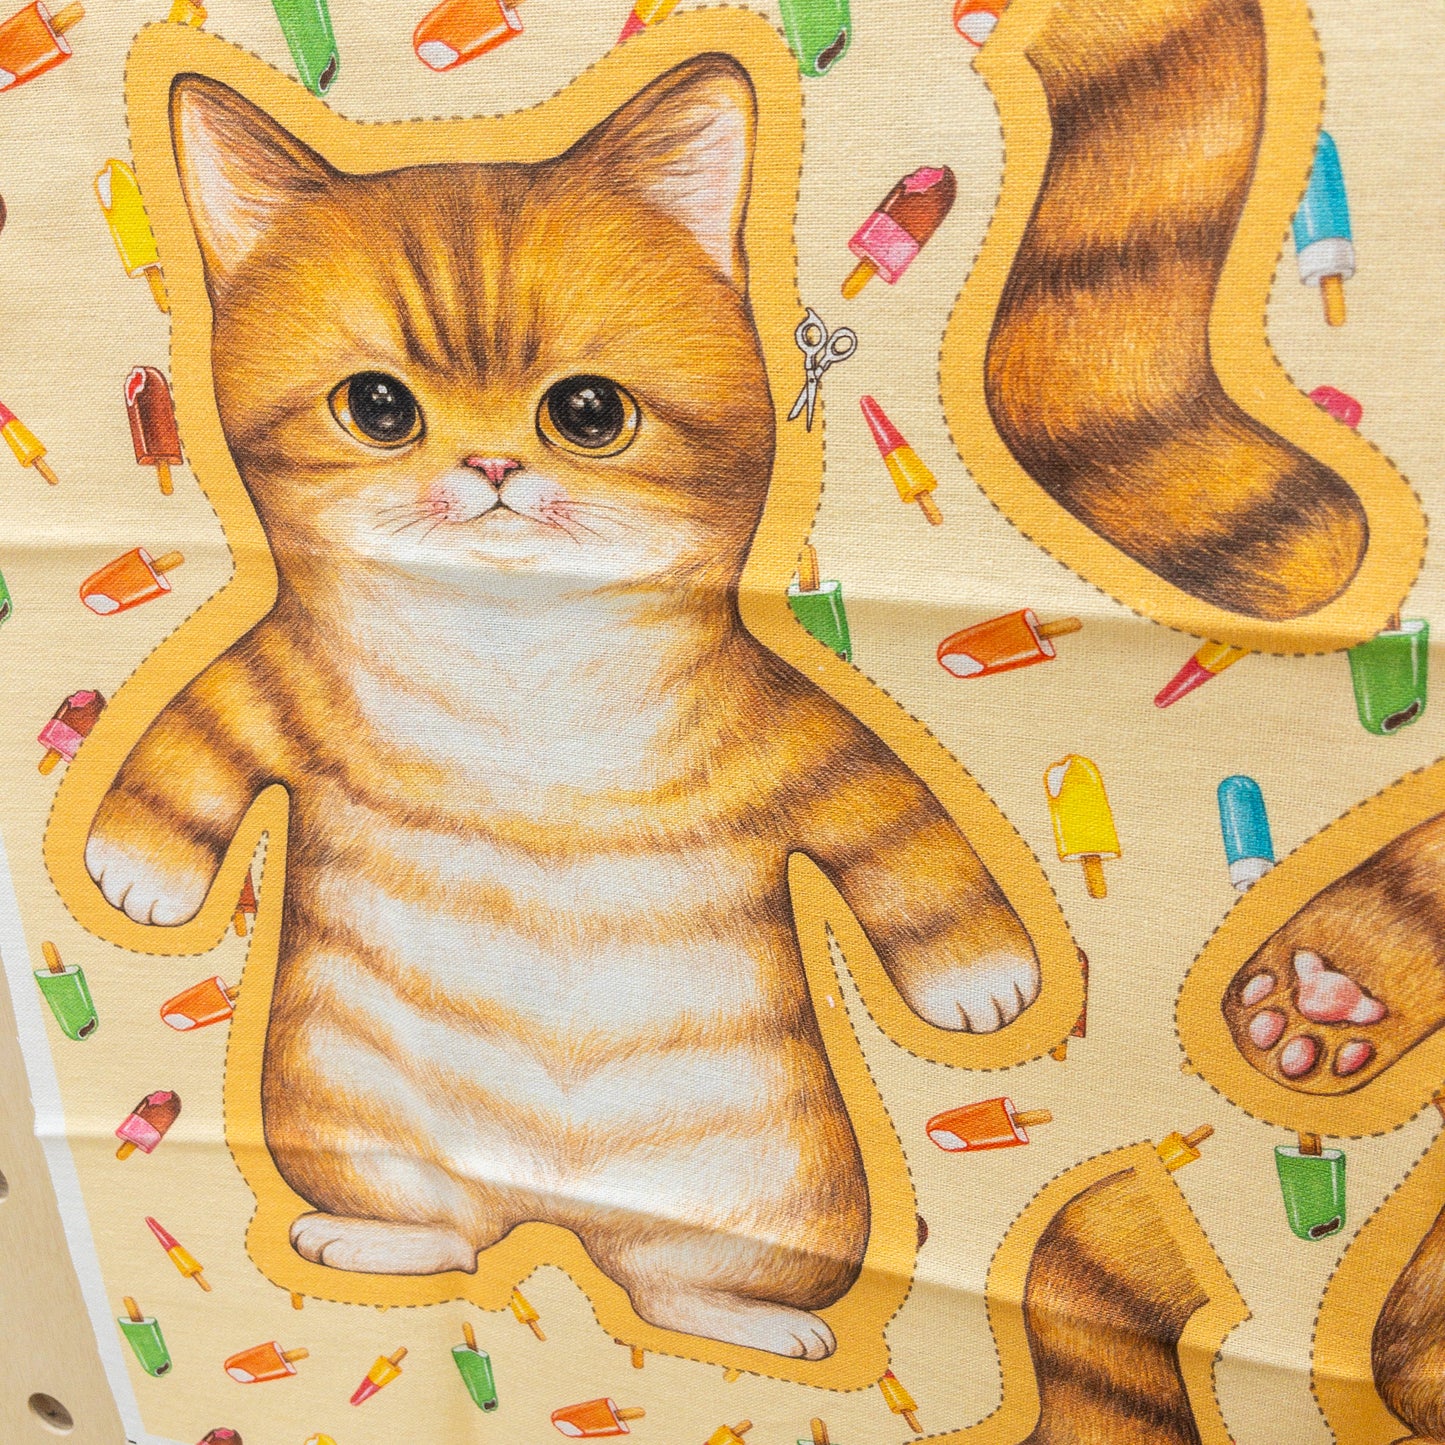 preorder預購 - Unclecat 貓叔叔 | diy fabric for making cat doll "Coin" | cotton linen 棉麻